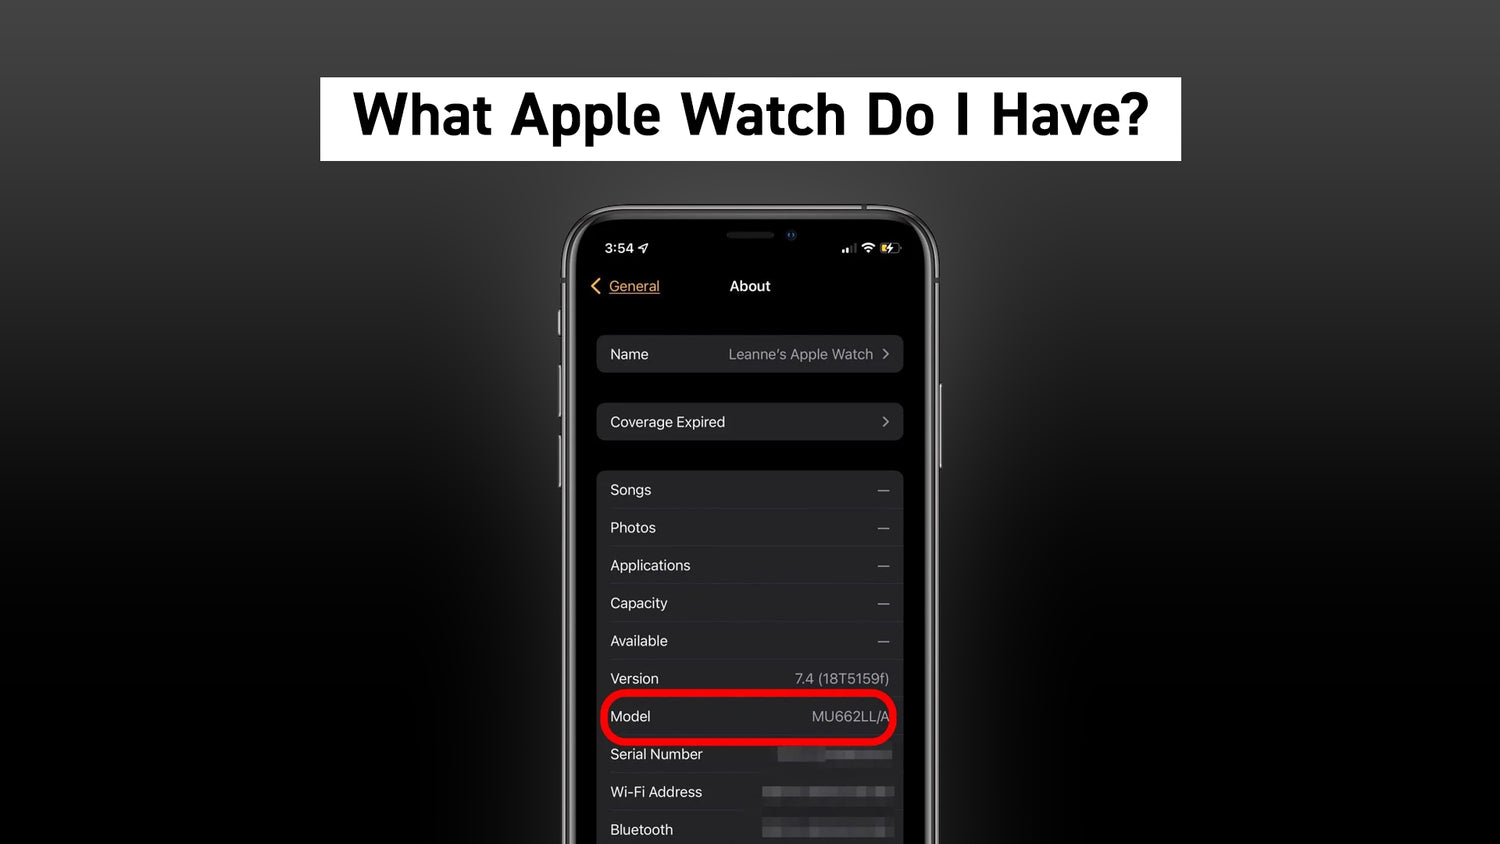 What Apple Watch Do I Have?